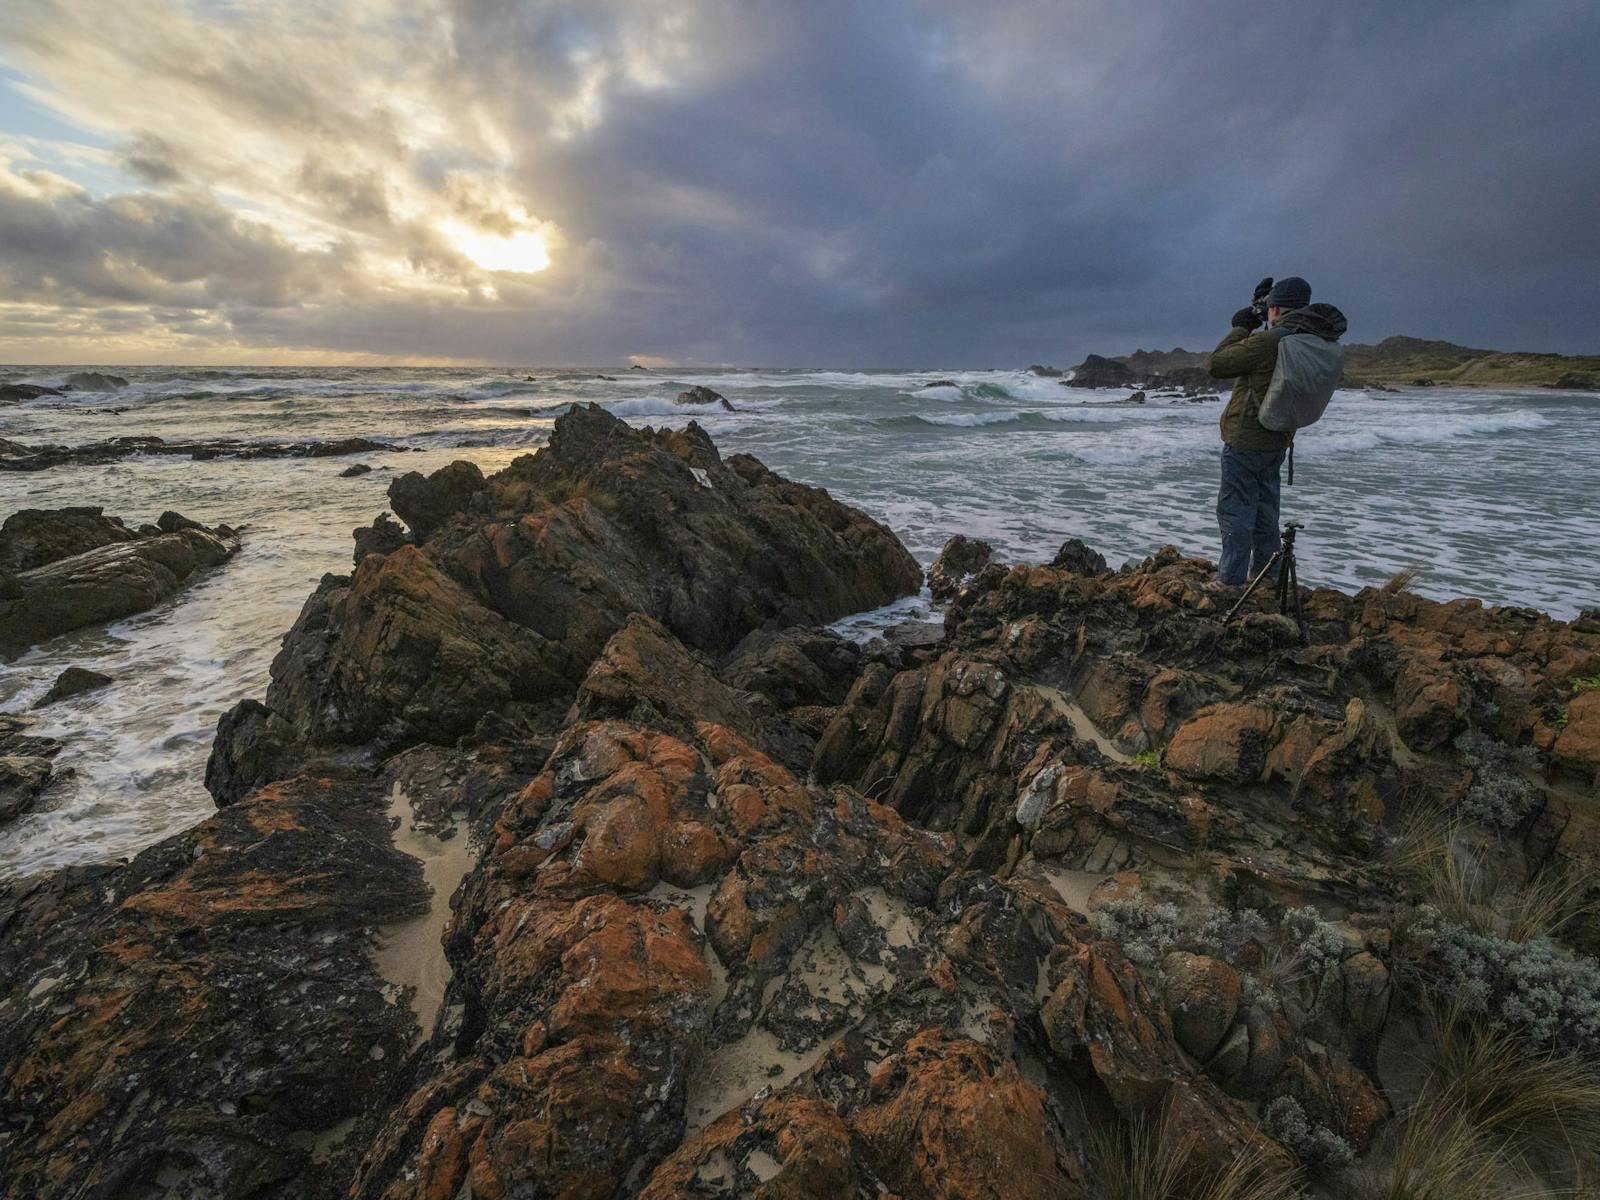 A photographer stands on the wild and remote Tarkine coast at sunset